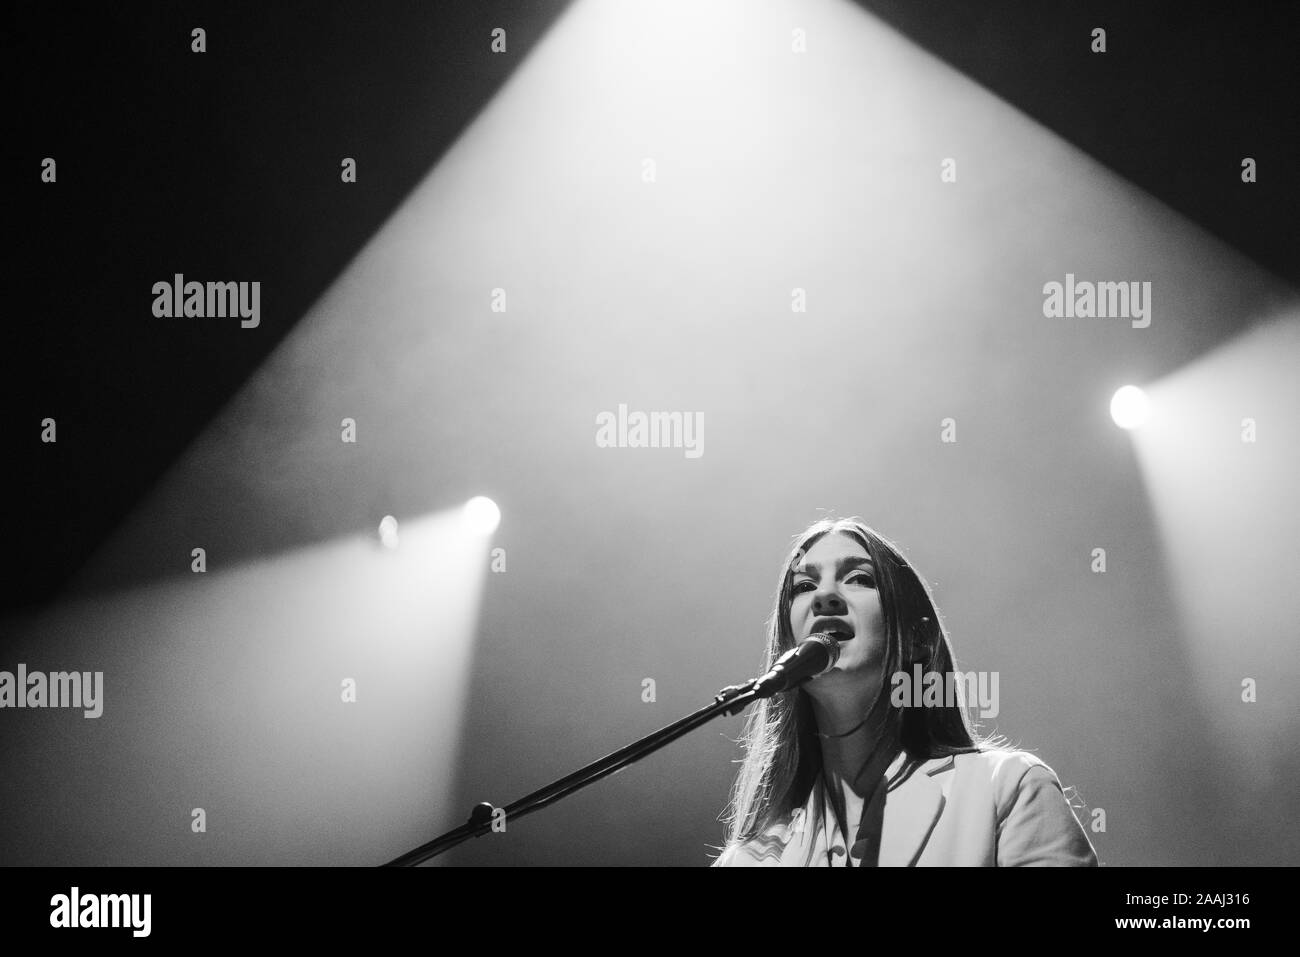 Natalie laura mering Black and White Stock Photos & Images - Alamy